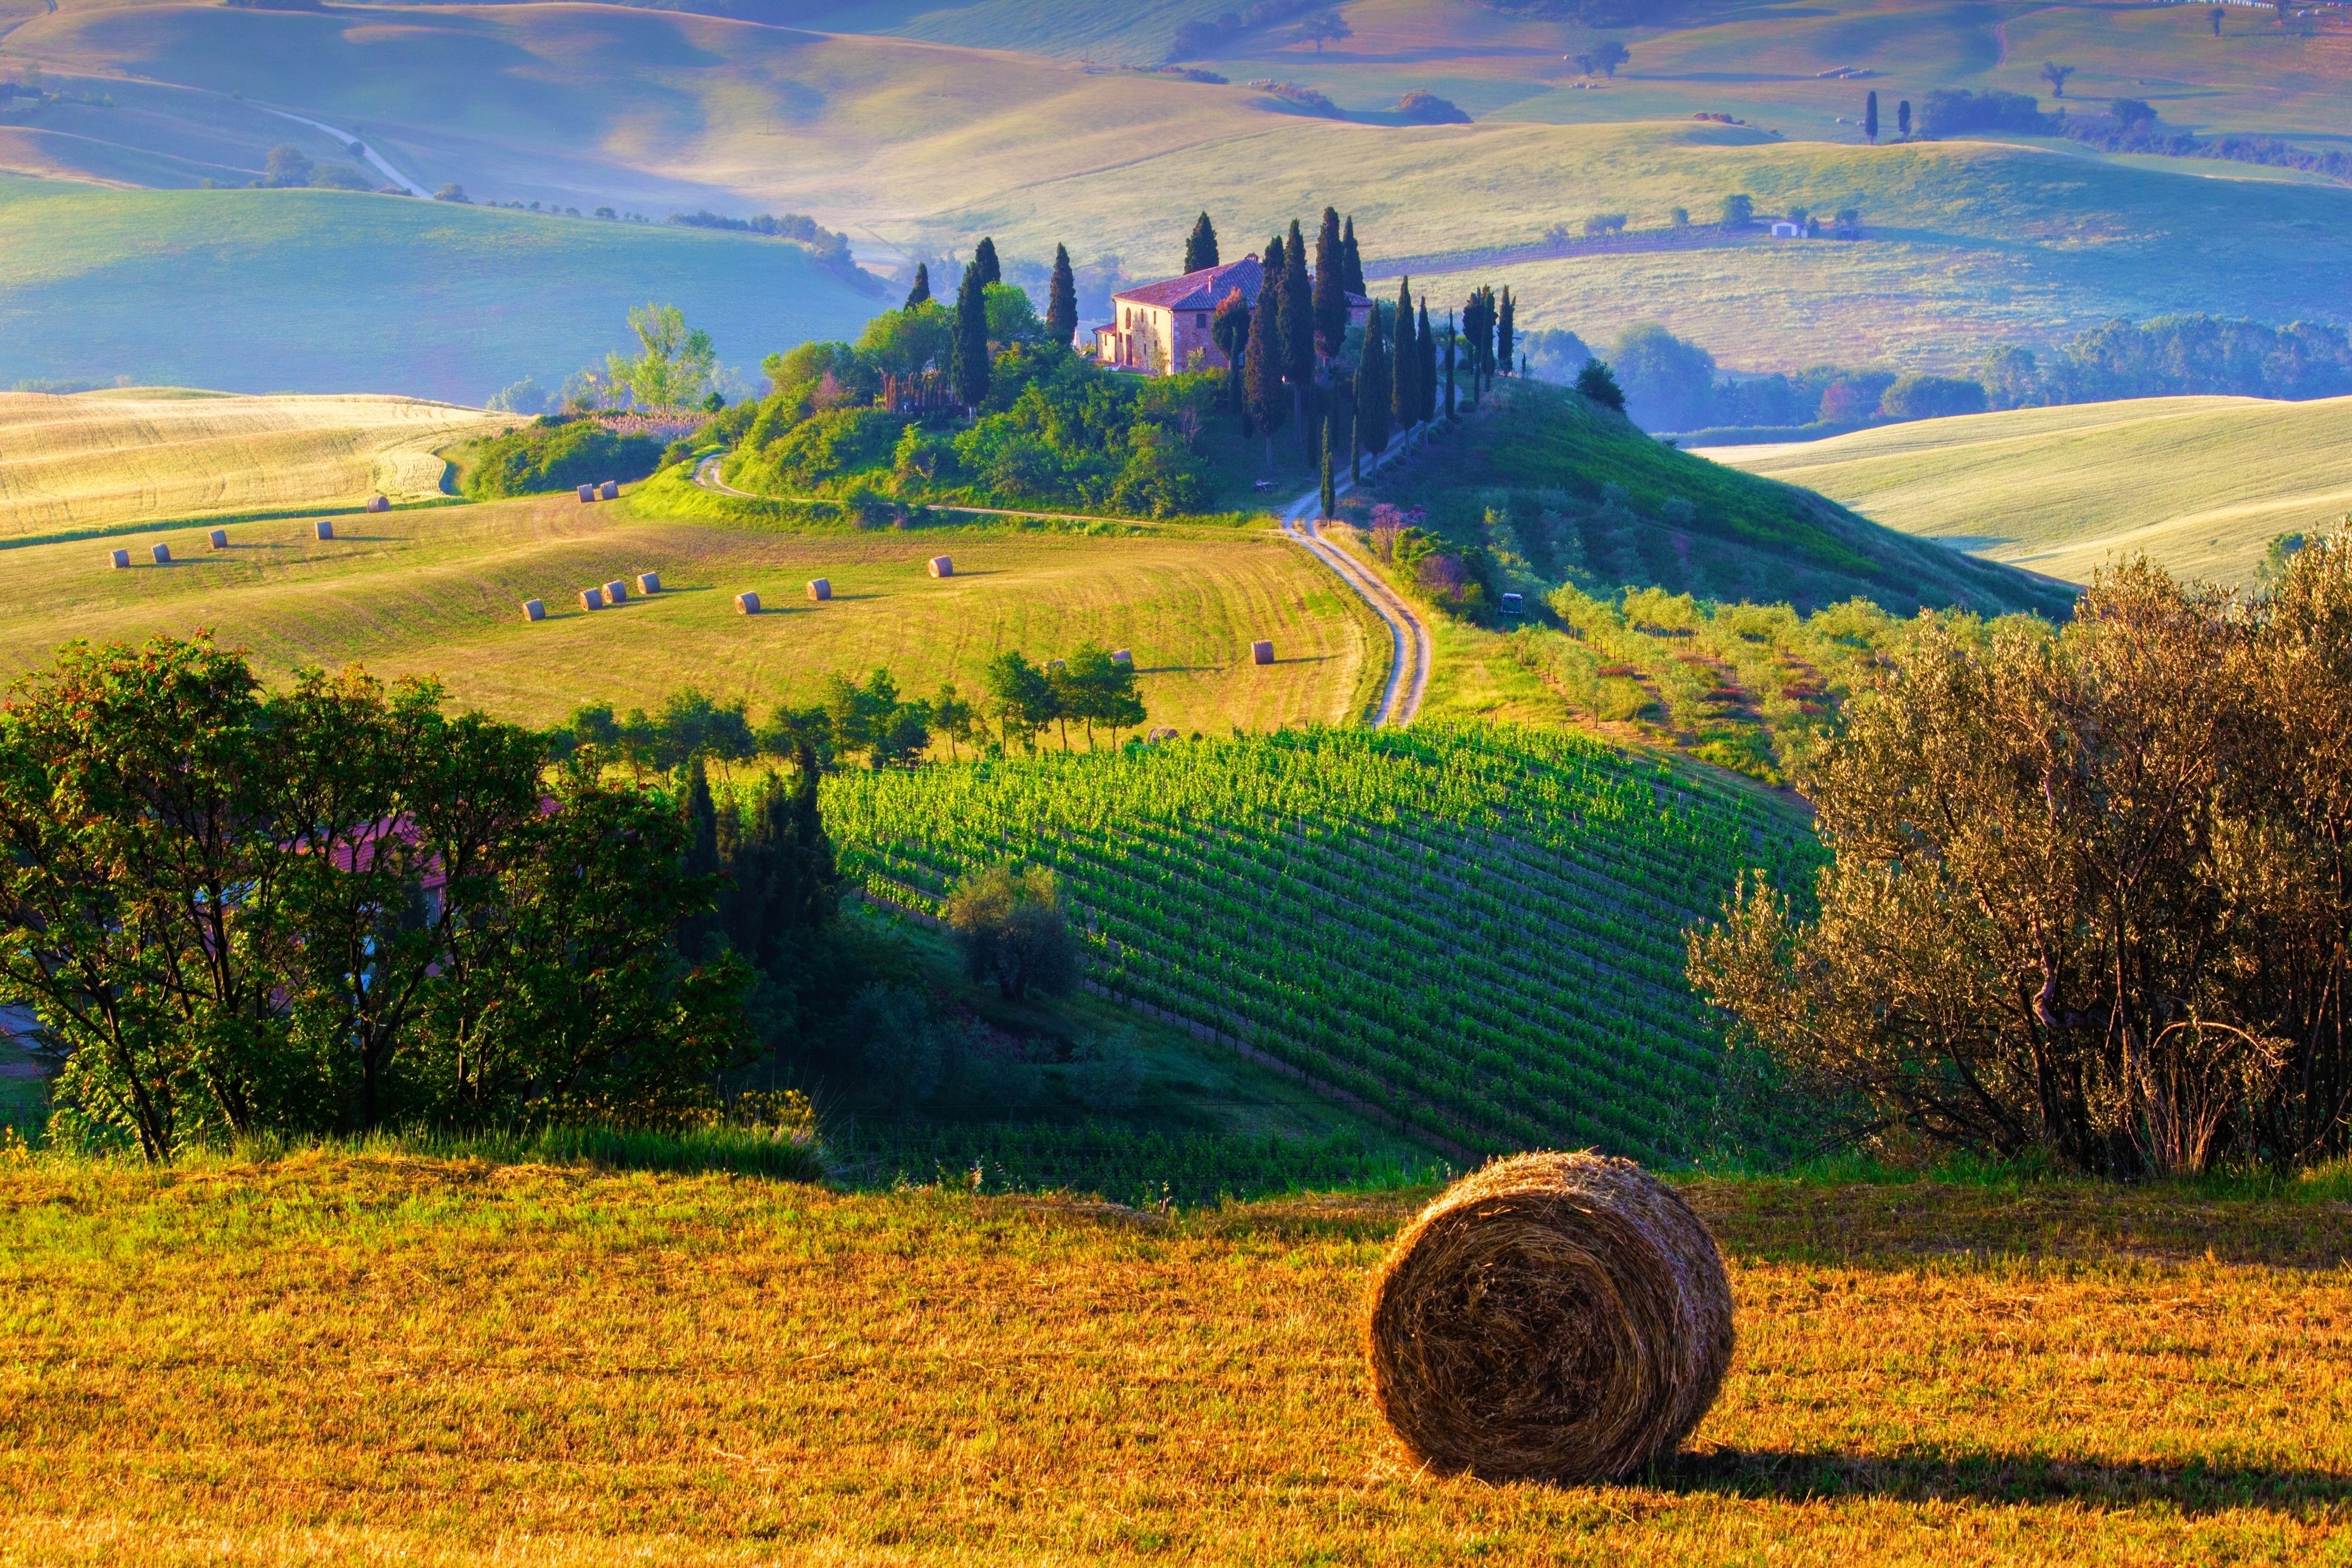 Wallpaper ID 336142  Photography Tuscany Phone Wallpaper Italy Field  1284x2778 free download